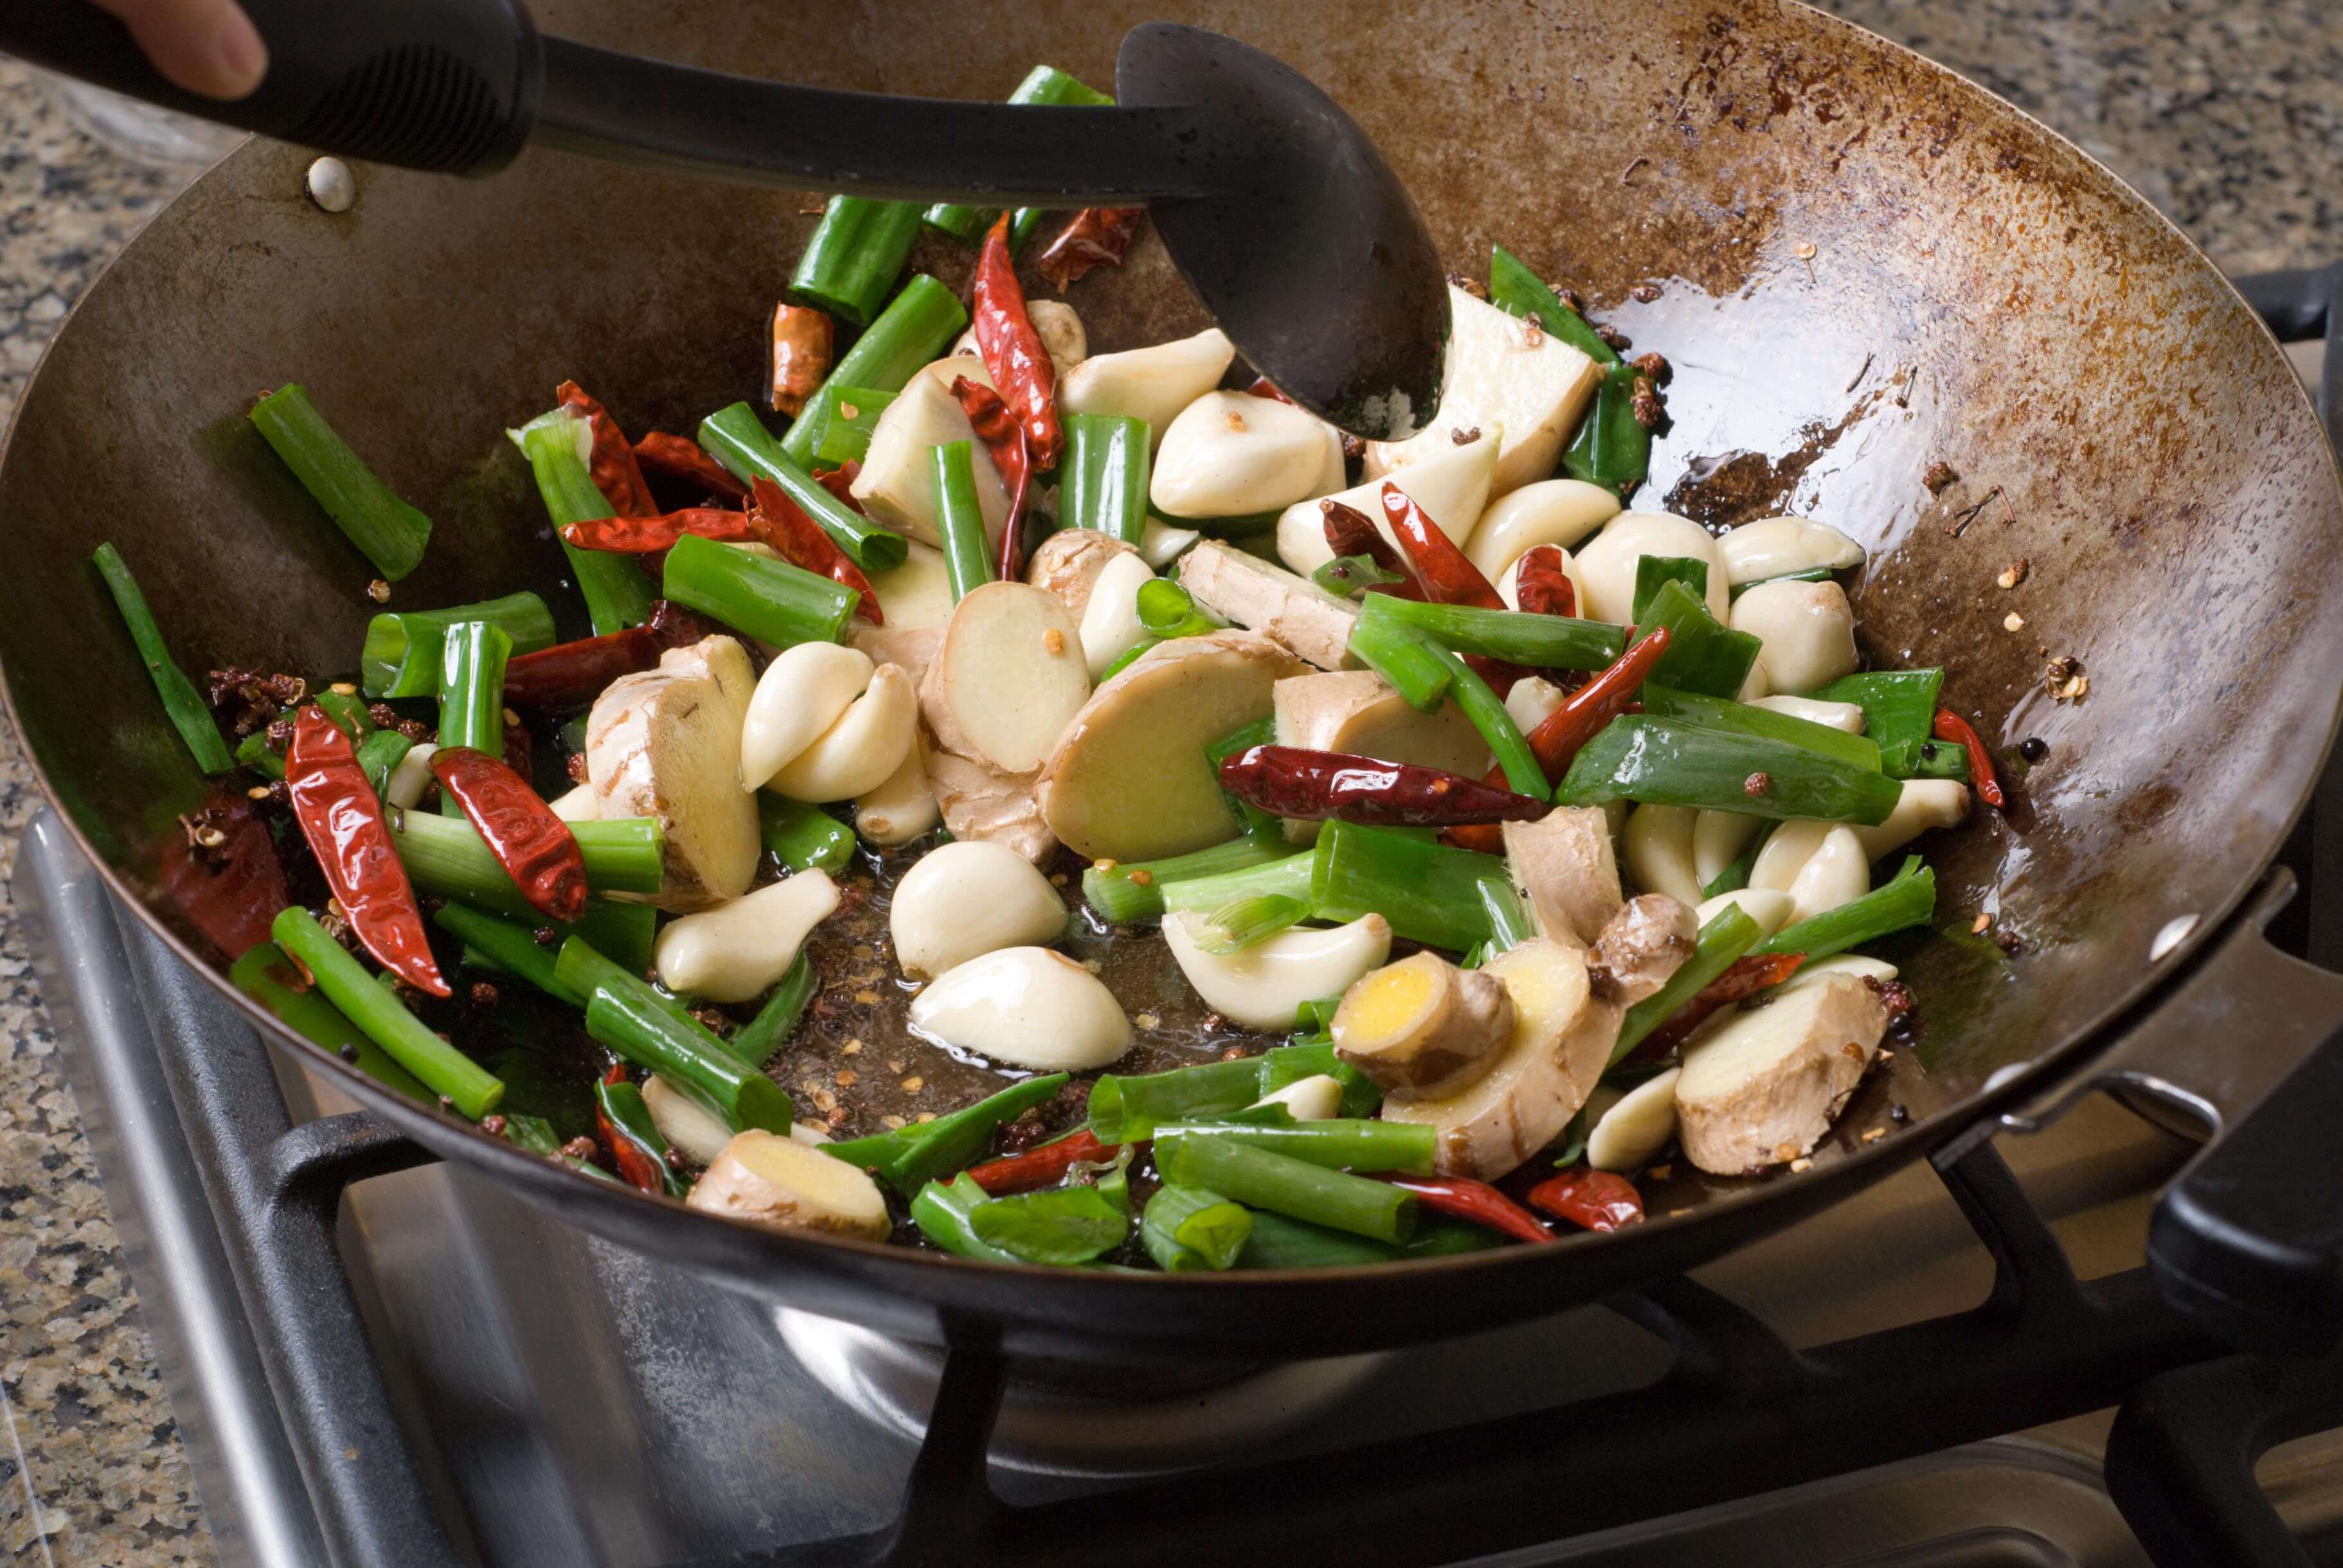 Stir frying chilies, garlic, ginger, green onions and sichuan pepper